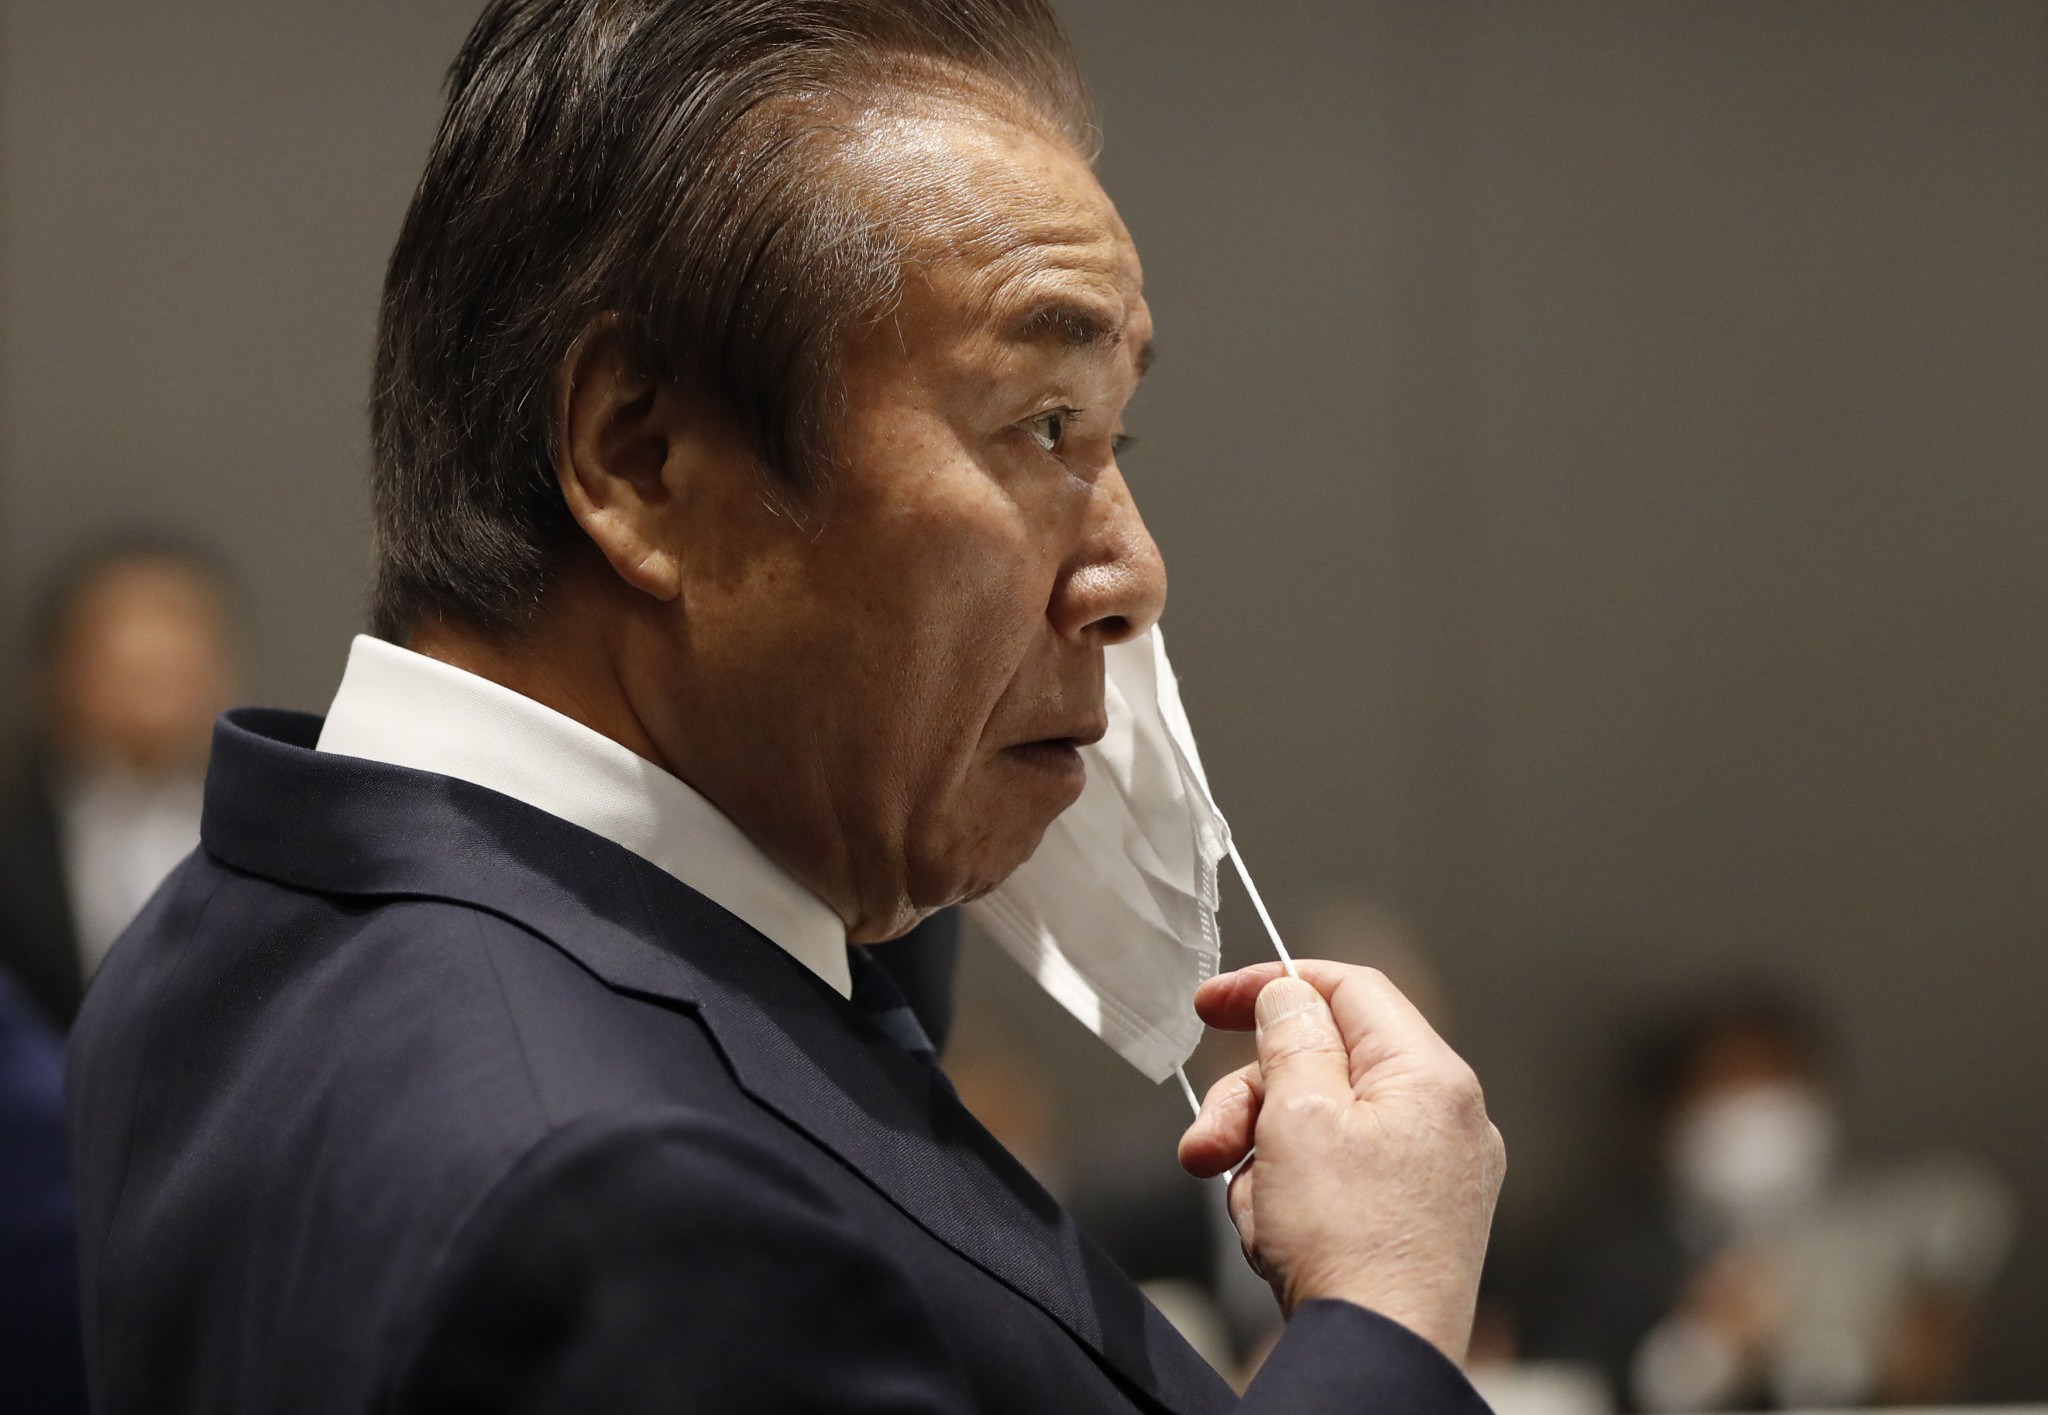 Tokyo 2020 Executive Bord member Haruyuki Takahashi is accused of accepting bribes linked to contracts for the Olympic and Paralympic Games ©Getty Images